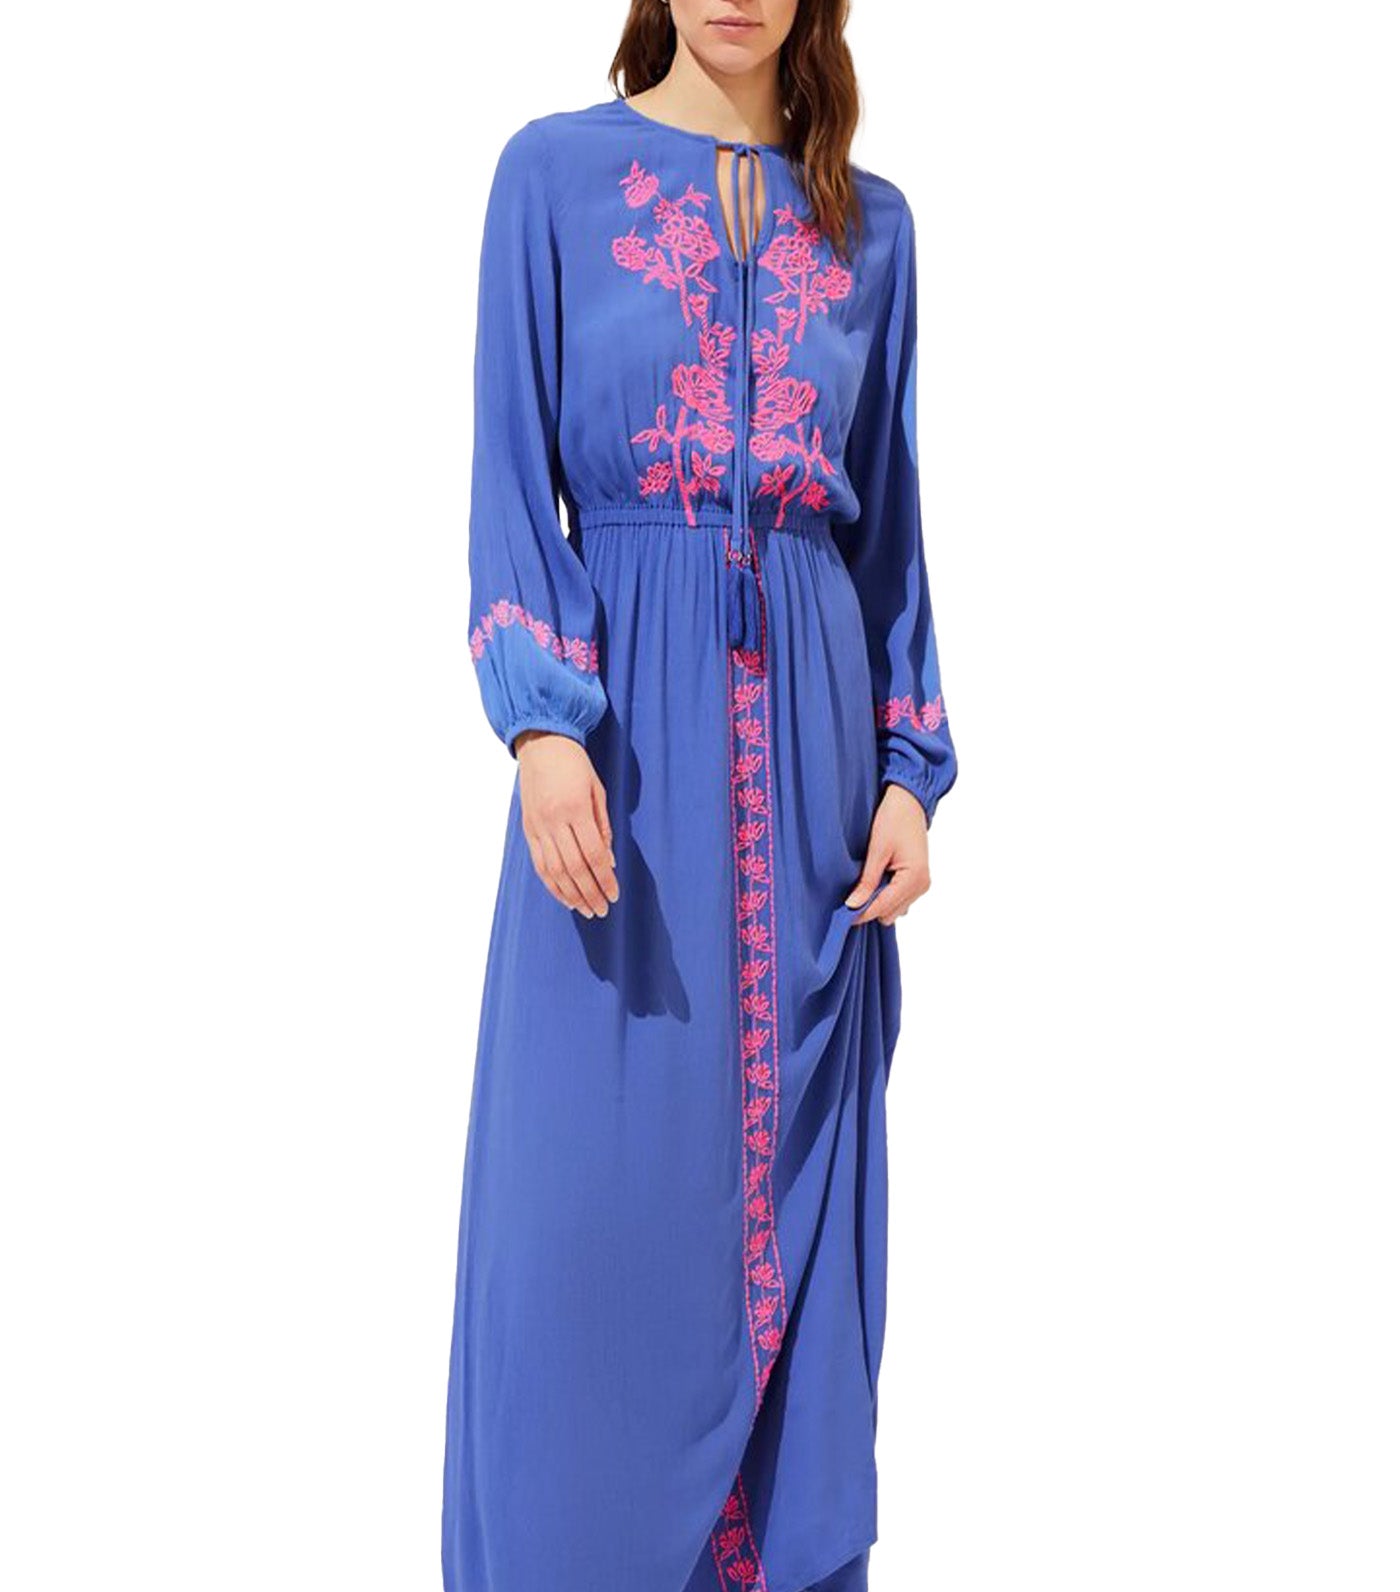 Embroidered V-Neck Maxi Beach Dress Lupin